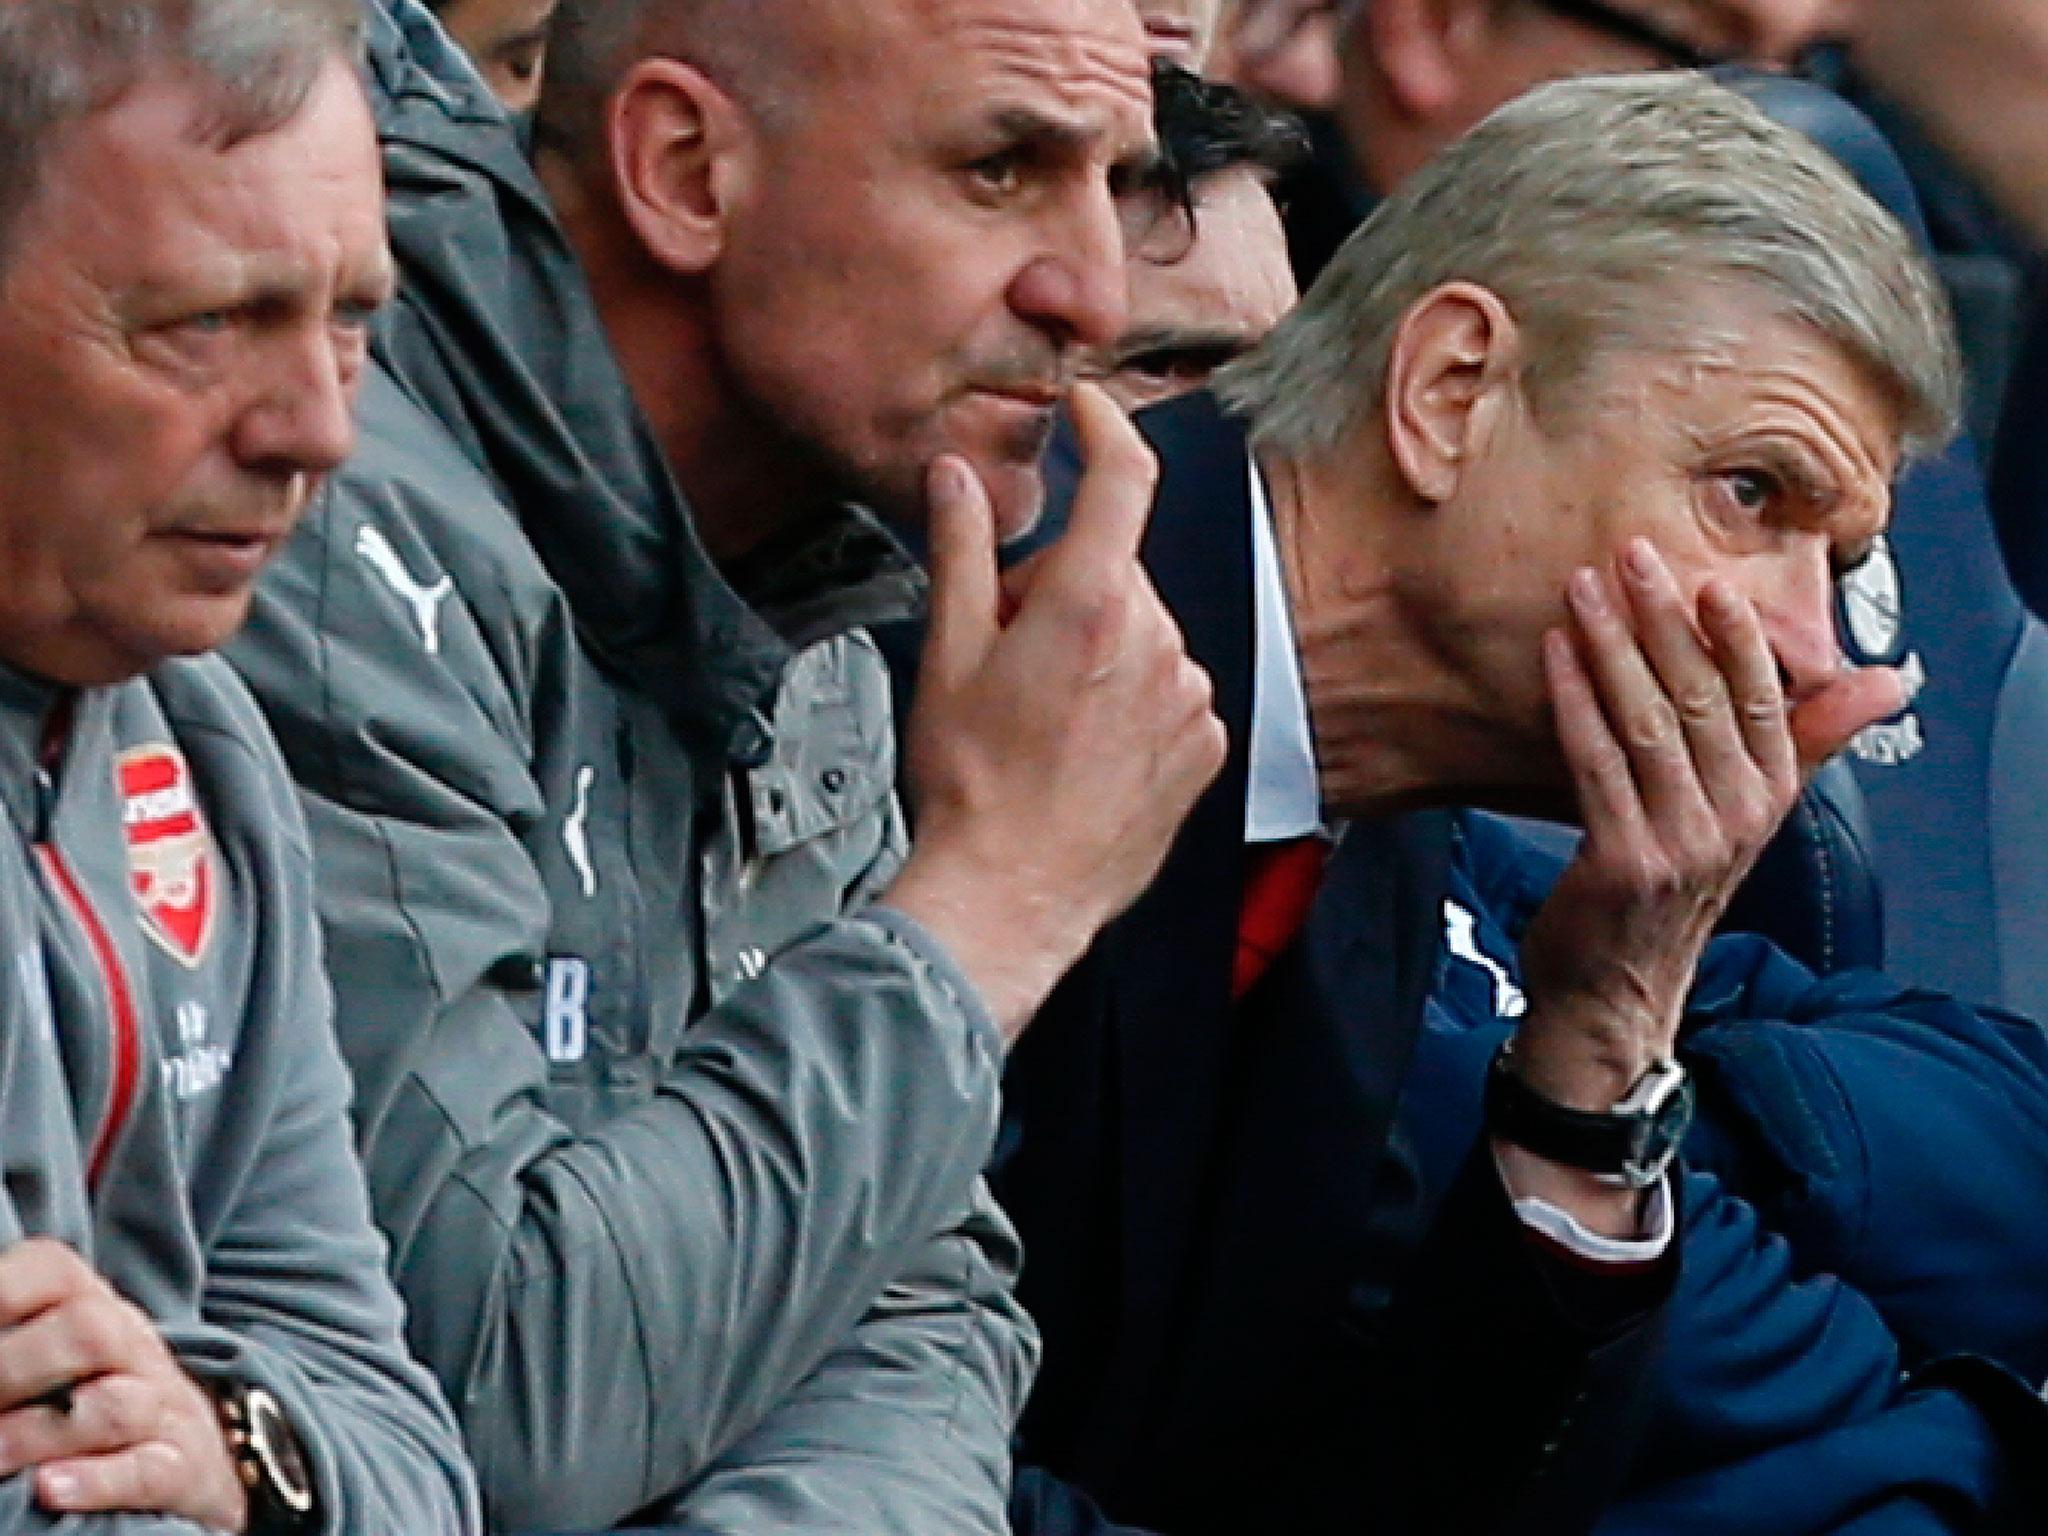 Arsene Wenger is yet publicly announce whether he will stay or leave